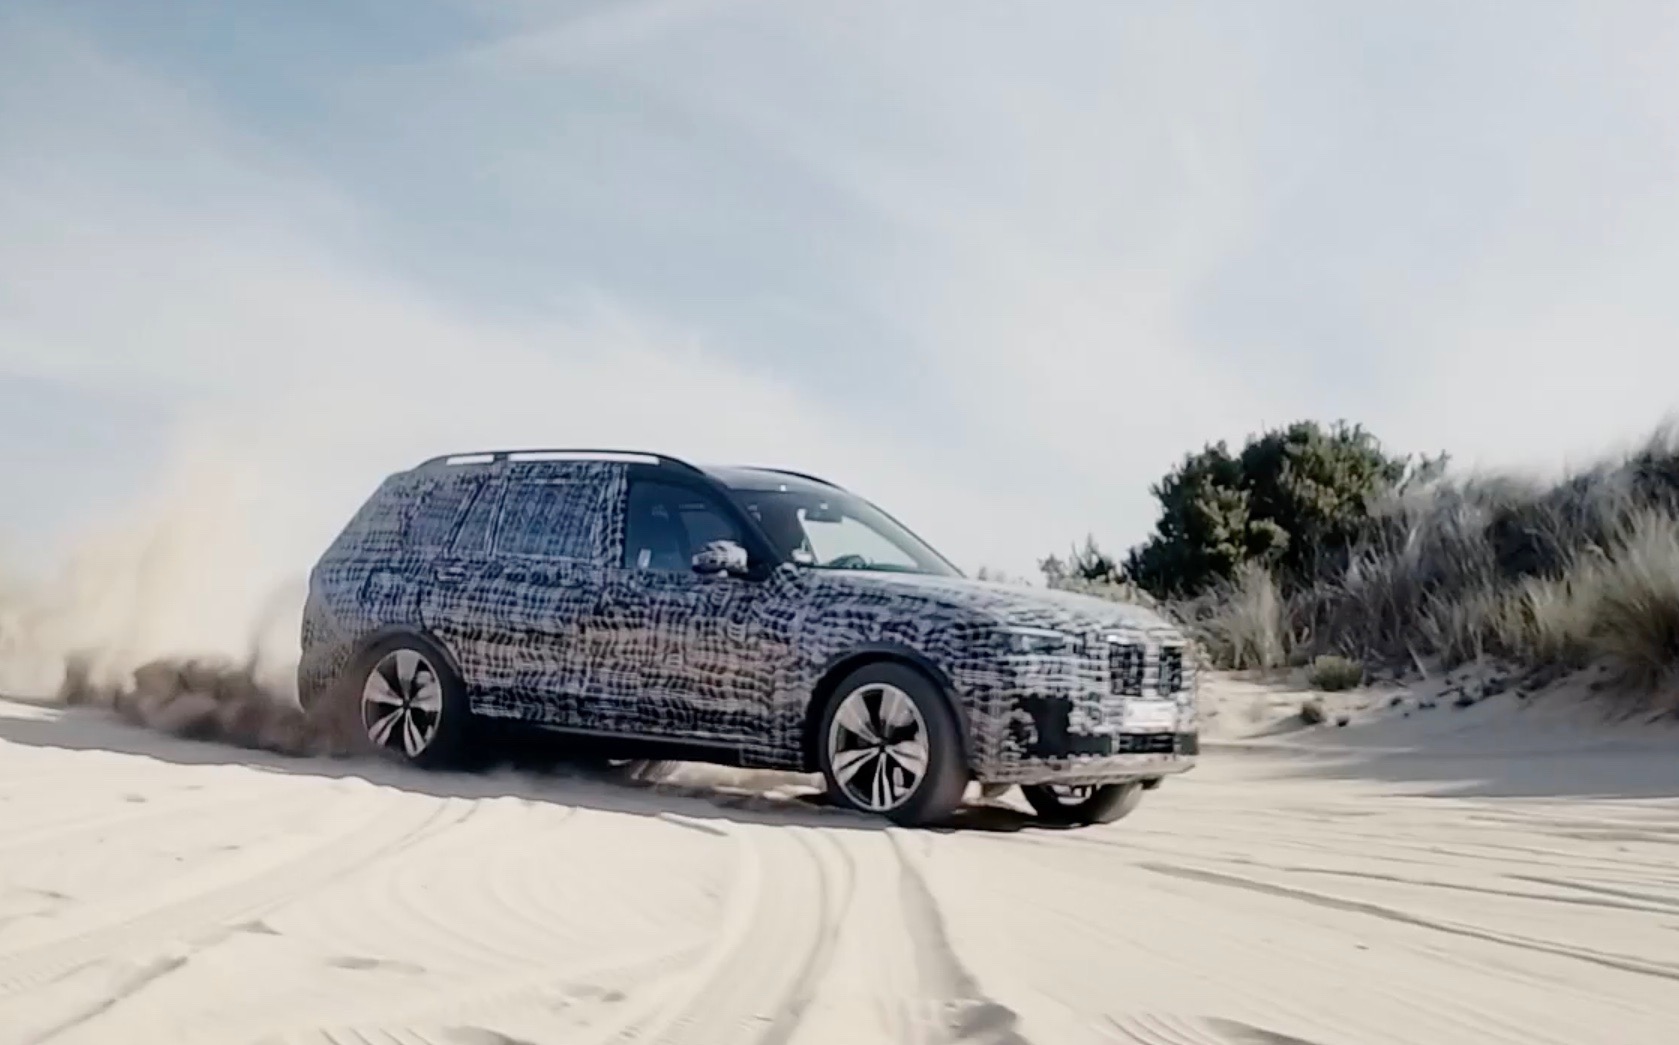 BMW X7 previewed undergoing all-terrain testing (video)